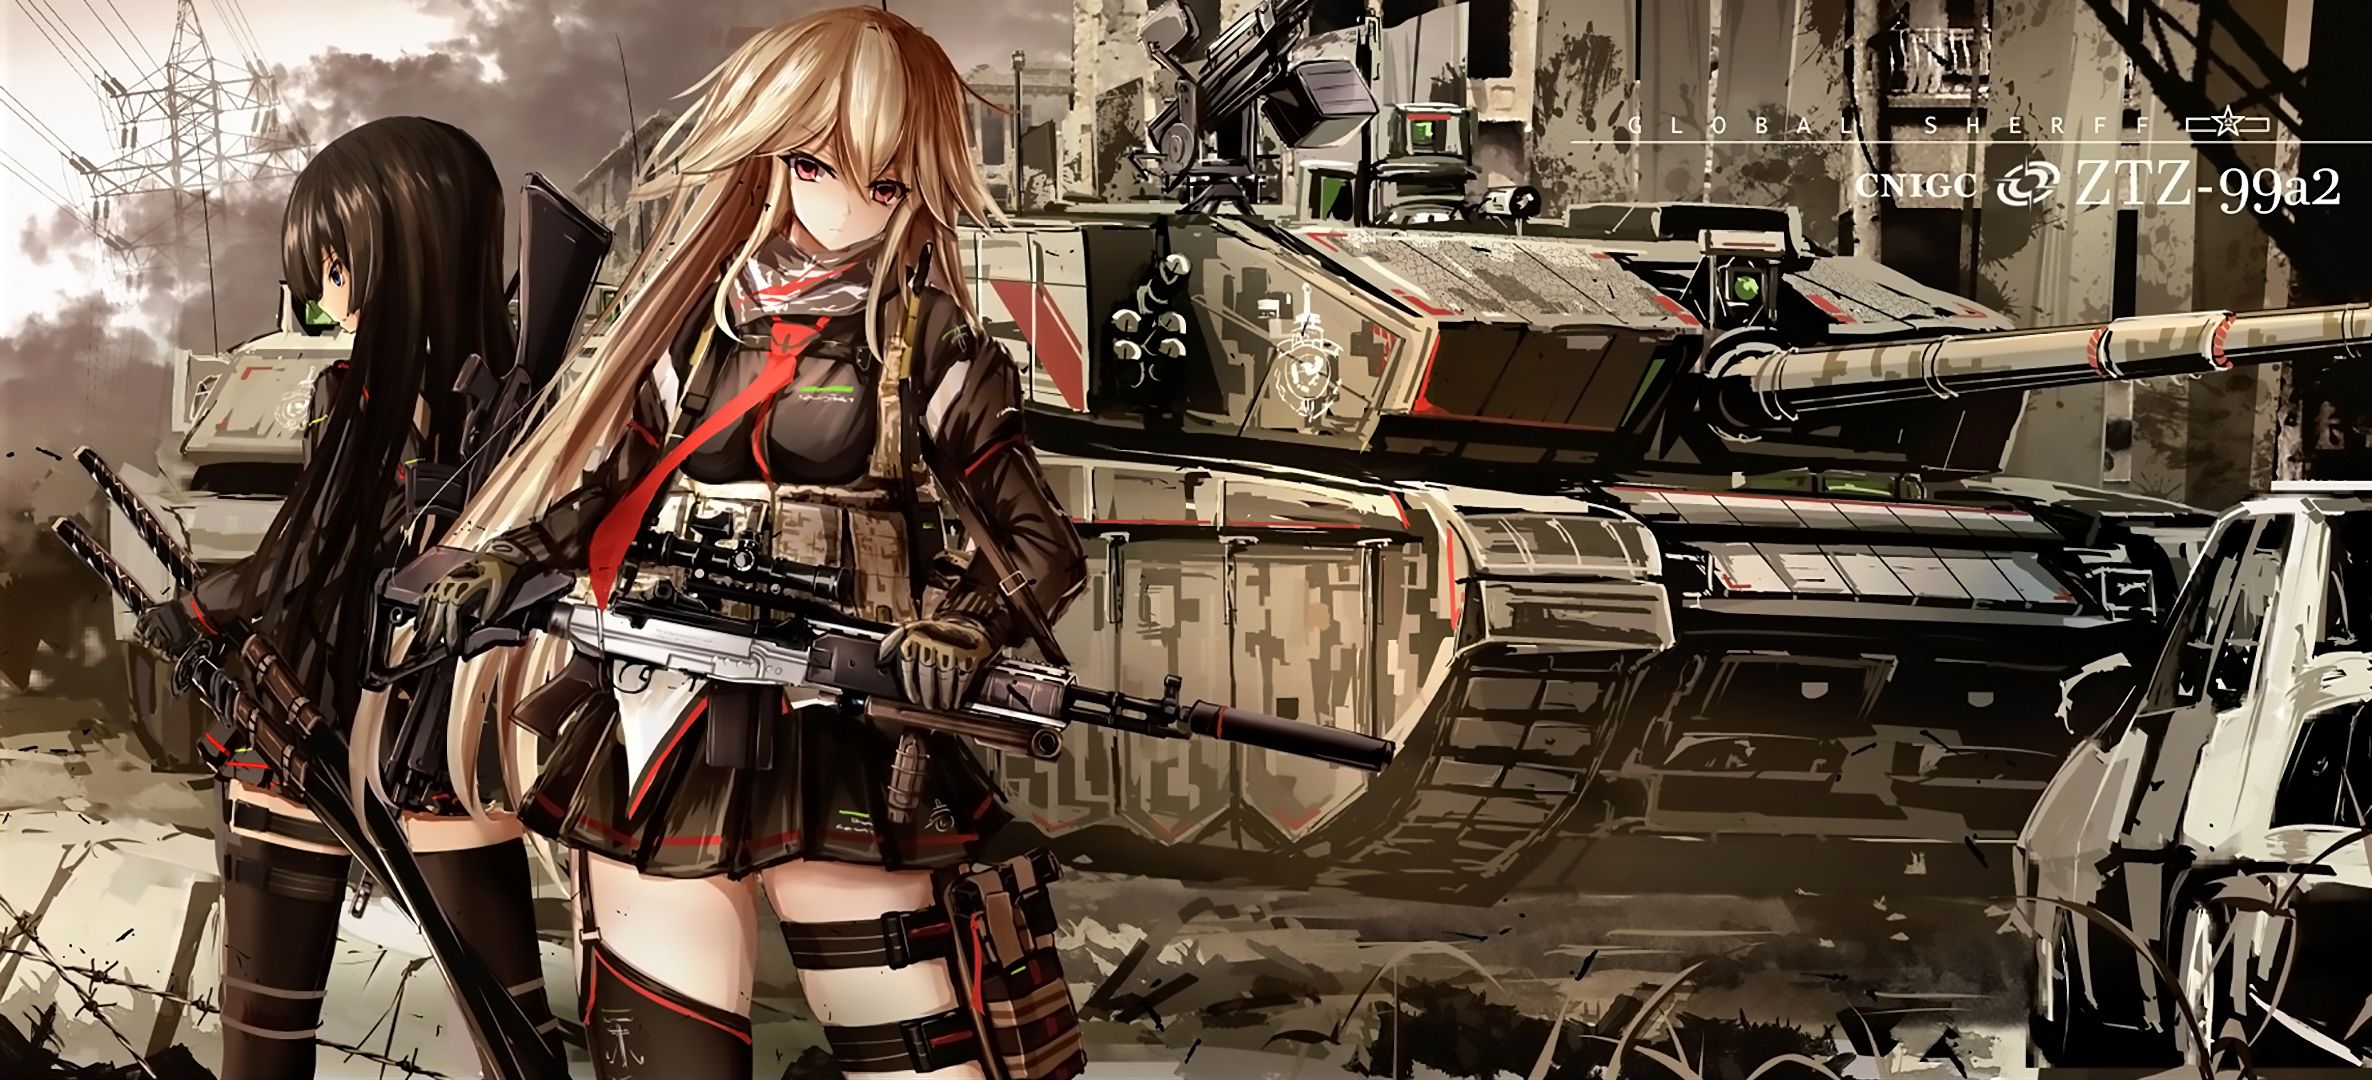 WoT/WoWS Anime Wallpapers: Montana, Cromwell & T28 – The Armored Patrol